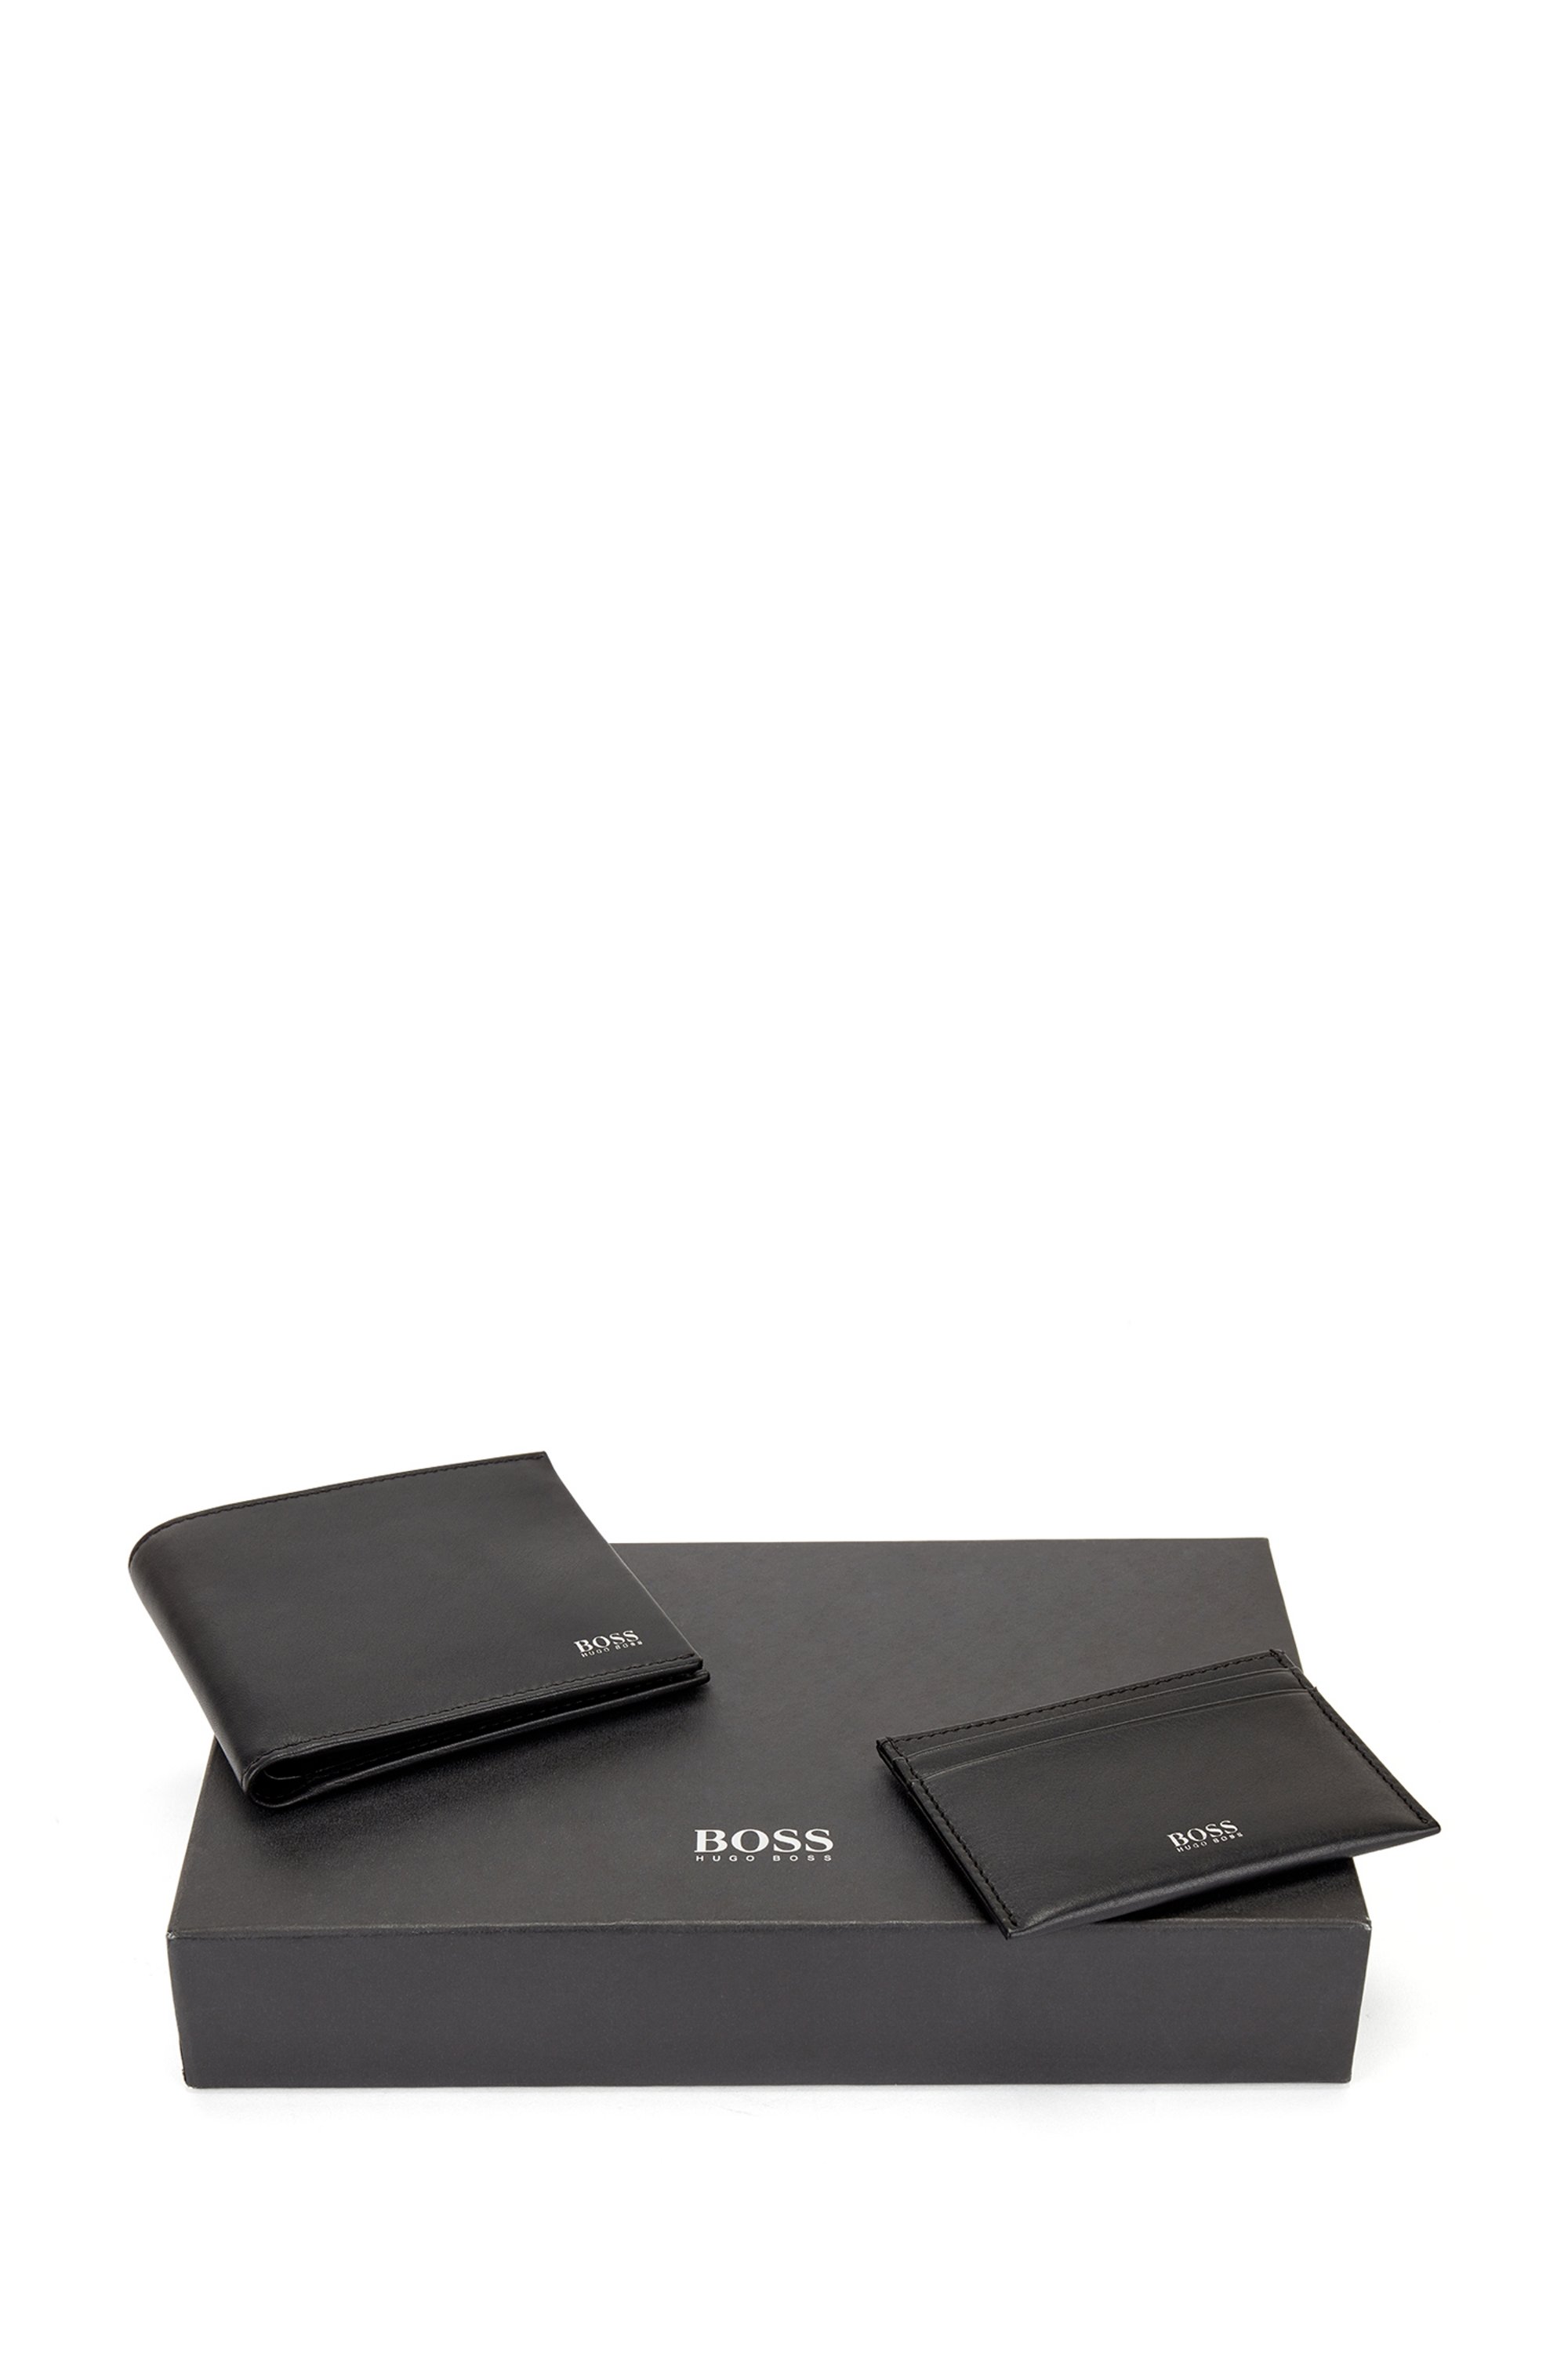 Nappa-leather wallet and card holder gift set, Black